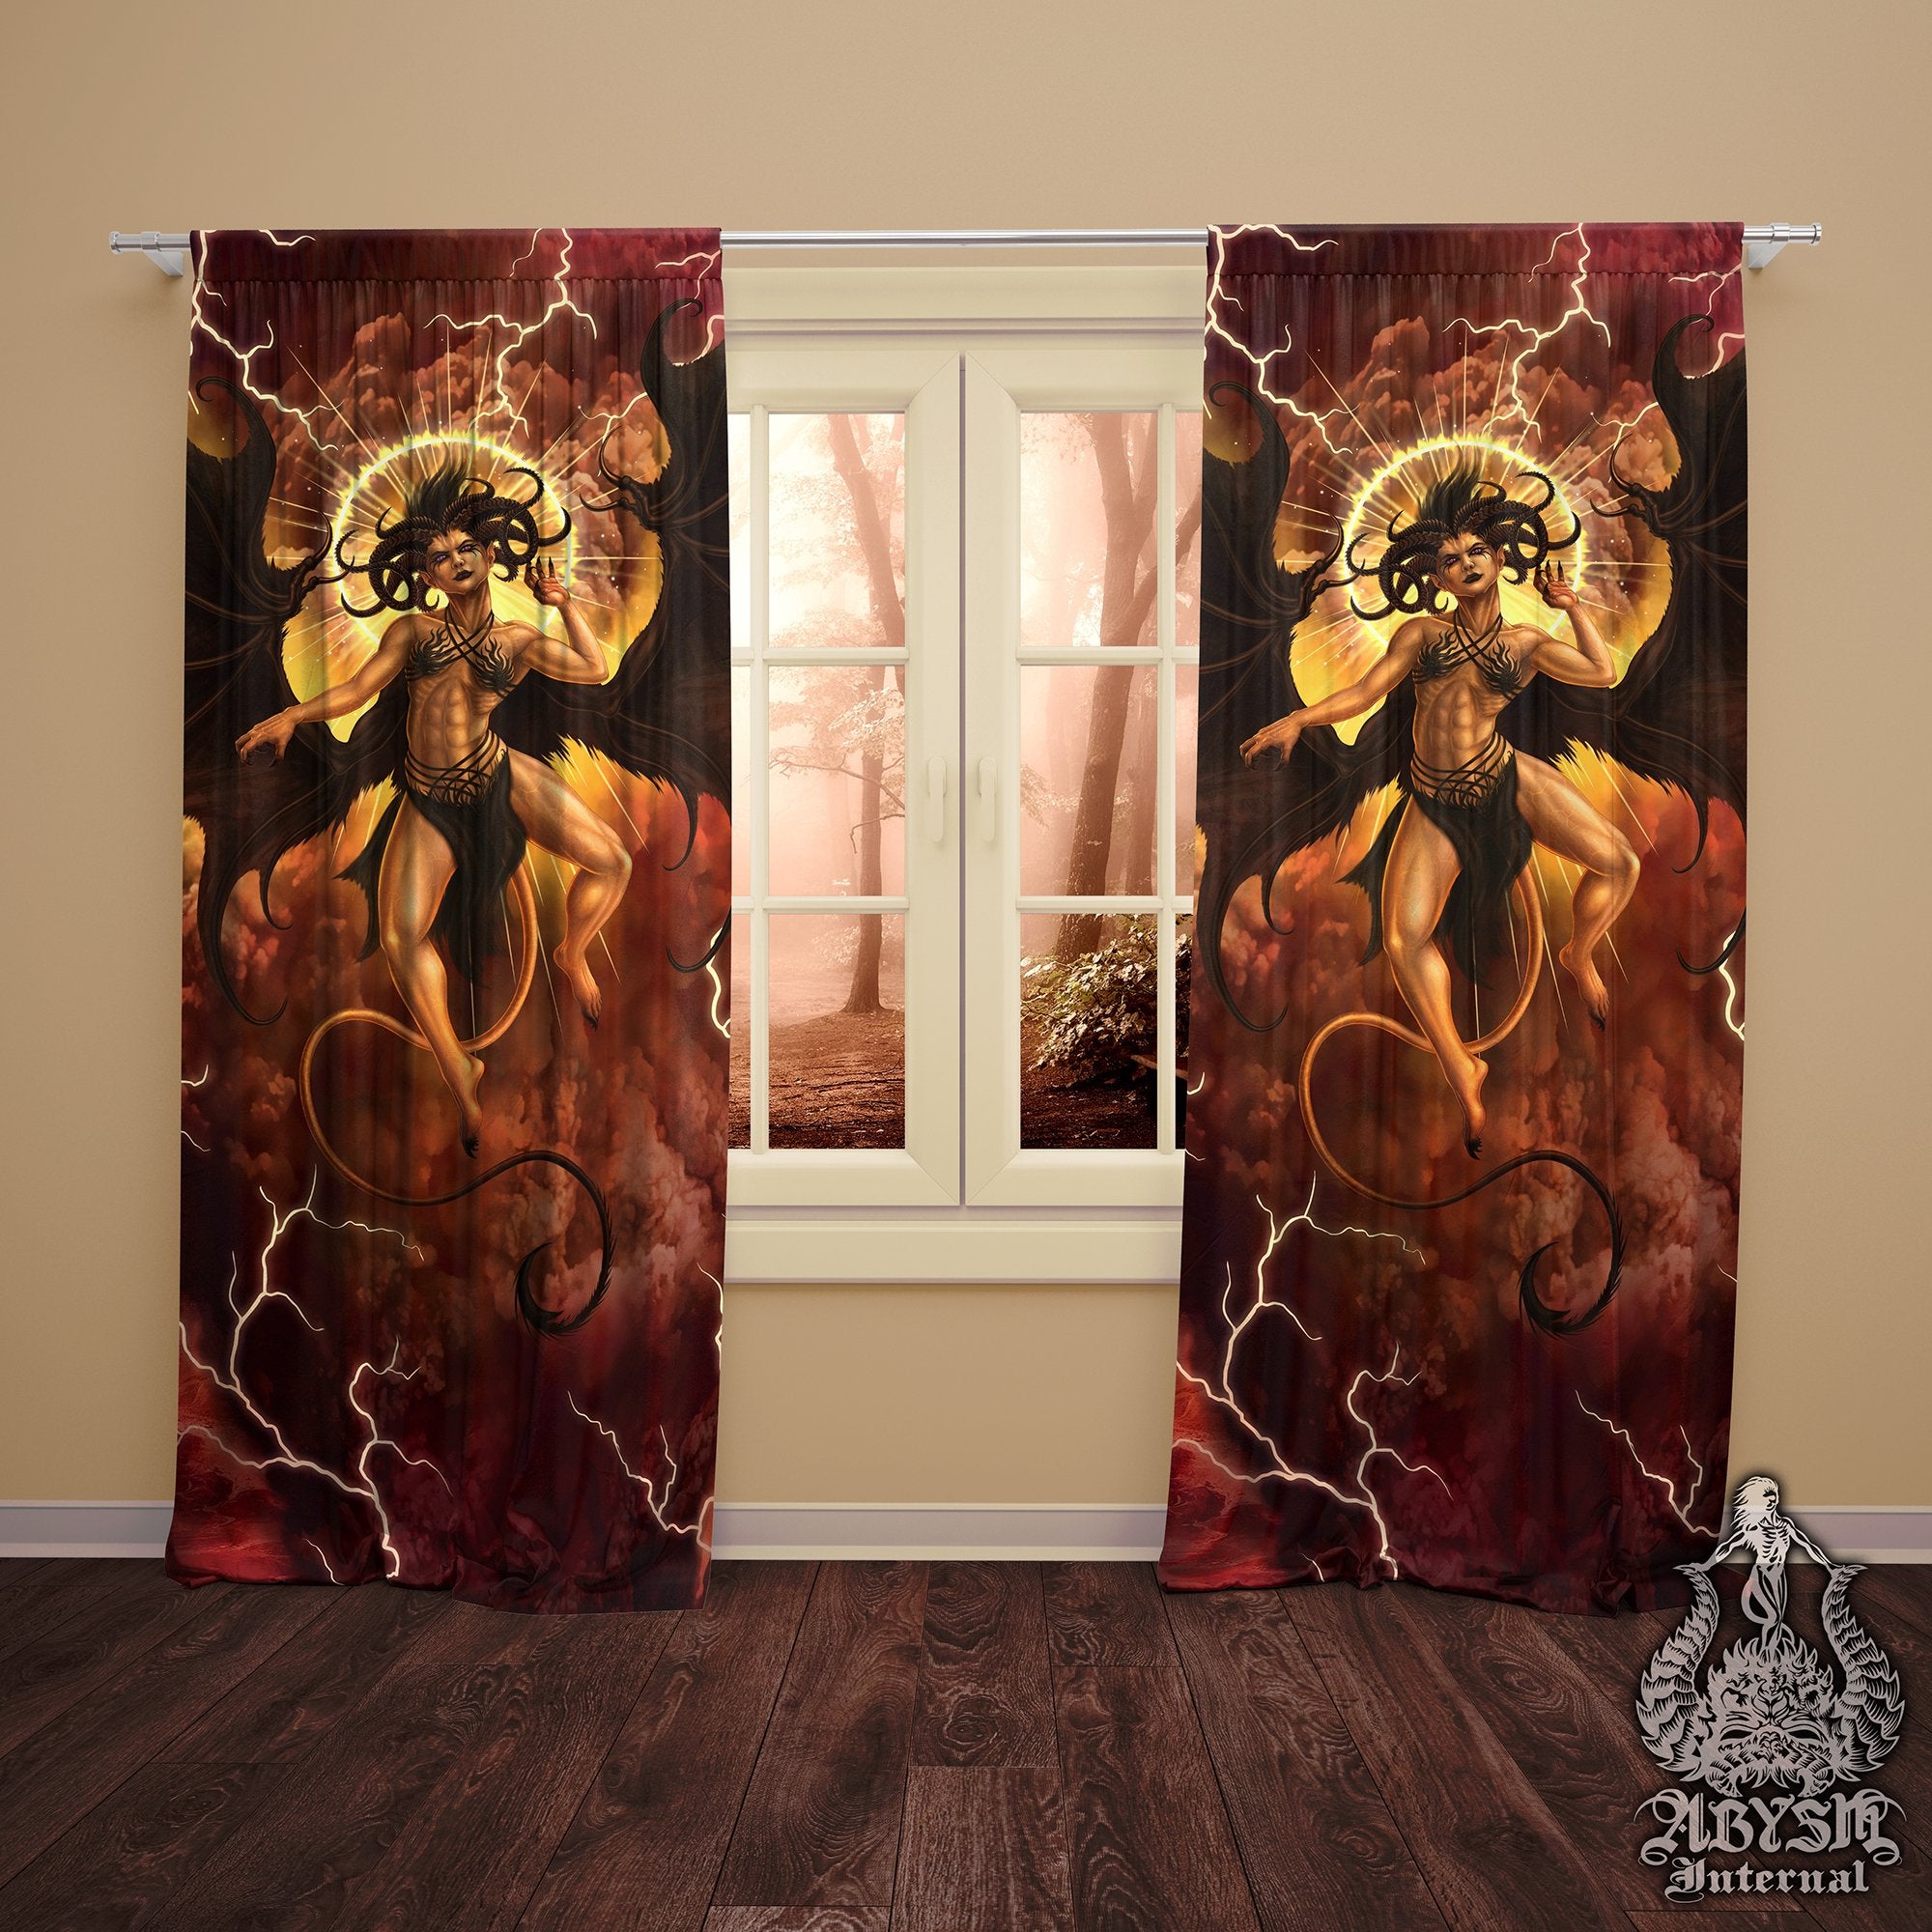 Lilith Curtains, 50x84' Printed Window Panels, NSFW Demoness, Dark Erotic Art Print, Satanic Decor - Nude, Semi or Clothed, 3 versions - Abysm Internal